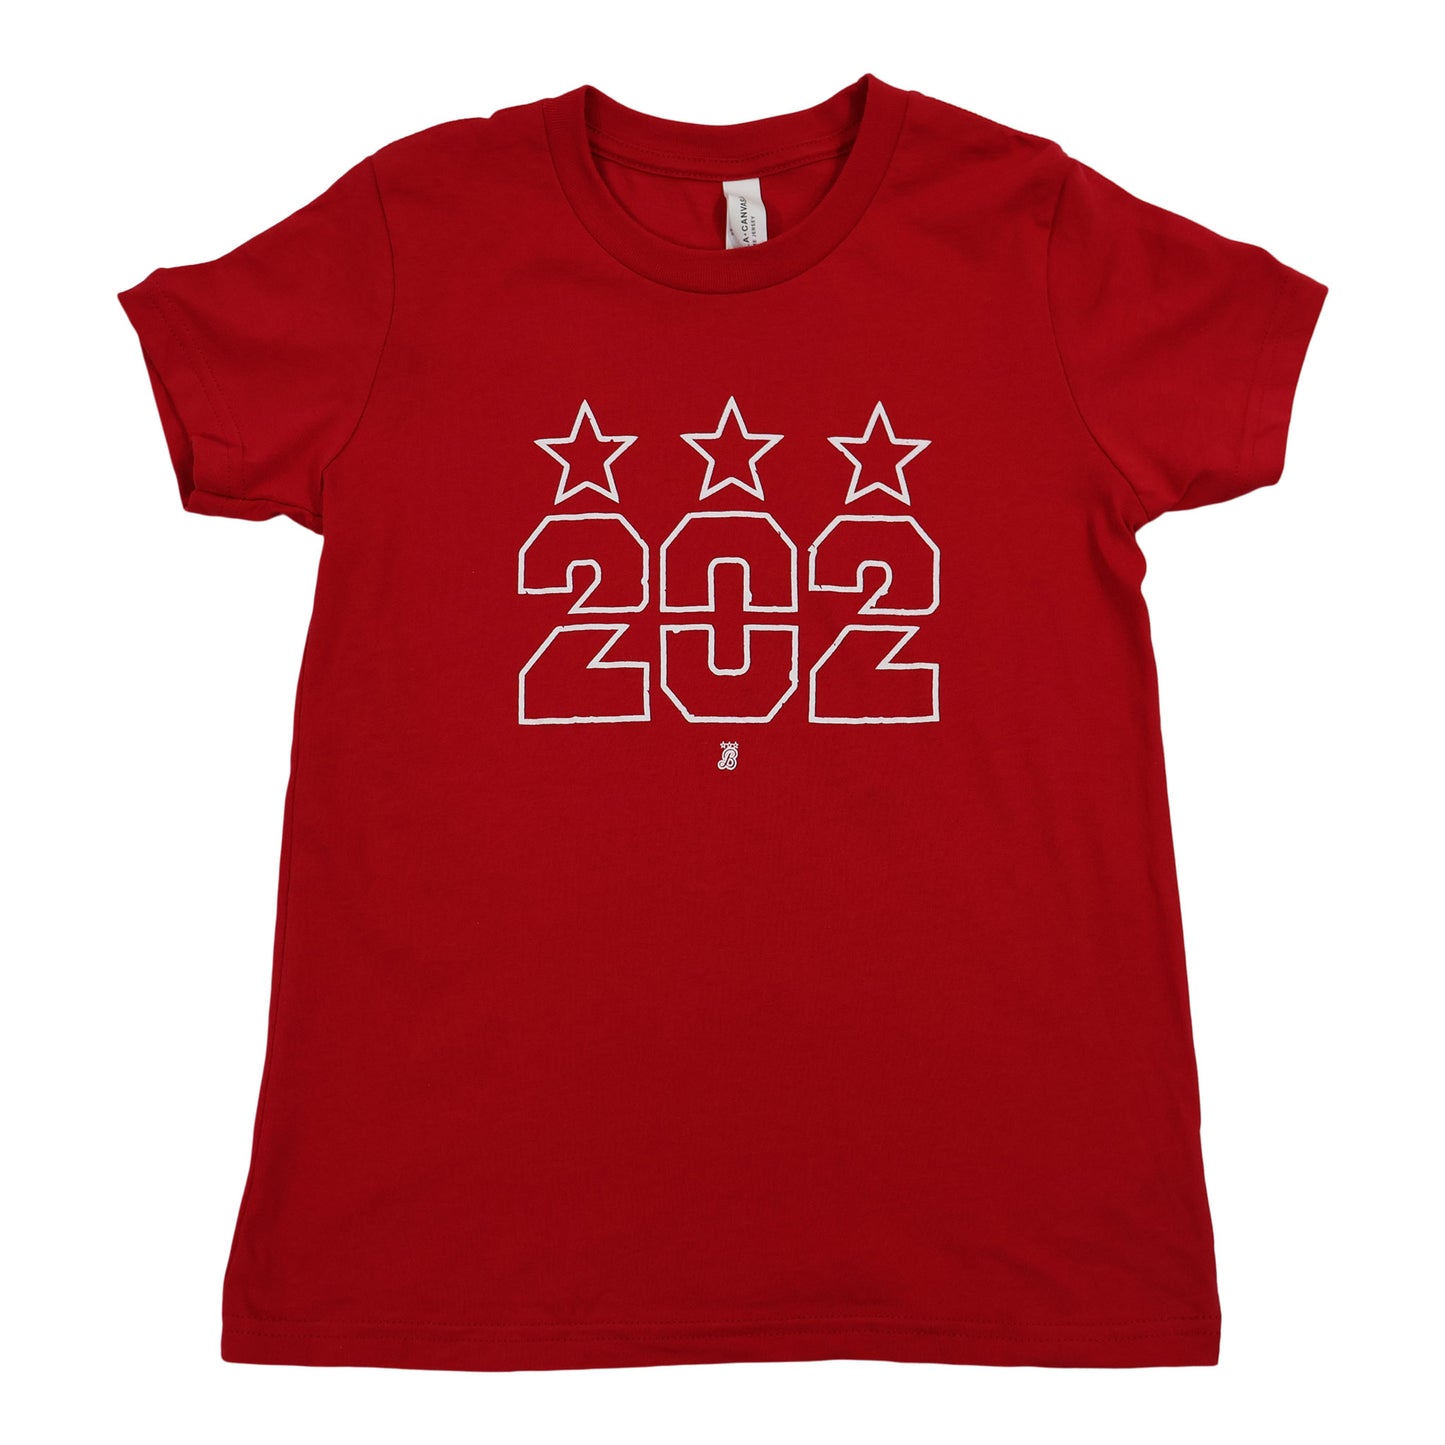 Youth - 202 Stars Remix - Assorted Colors